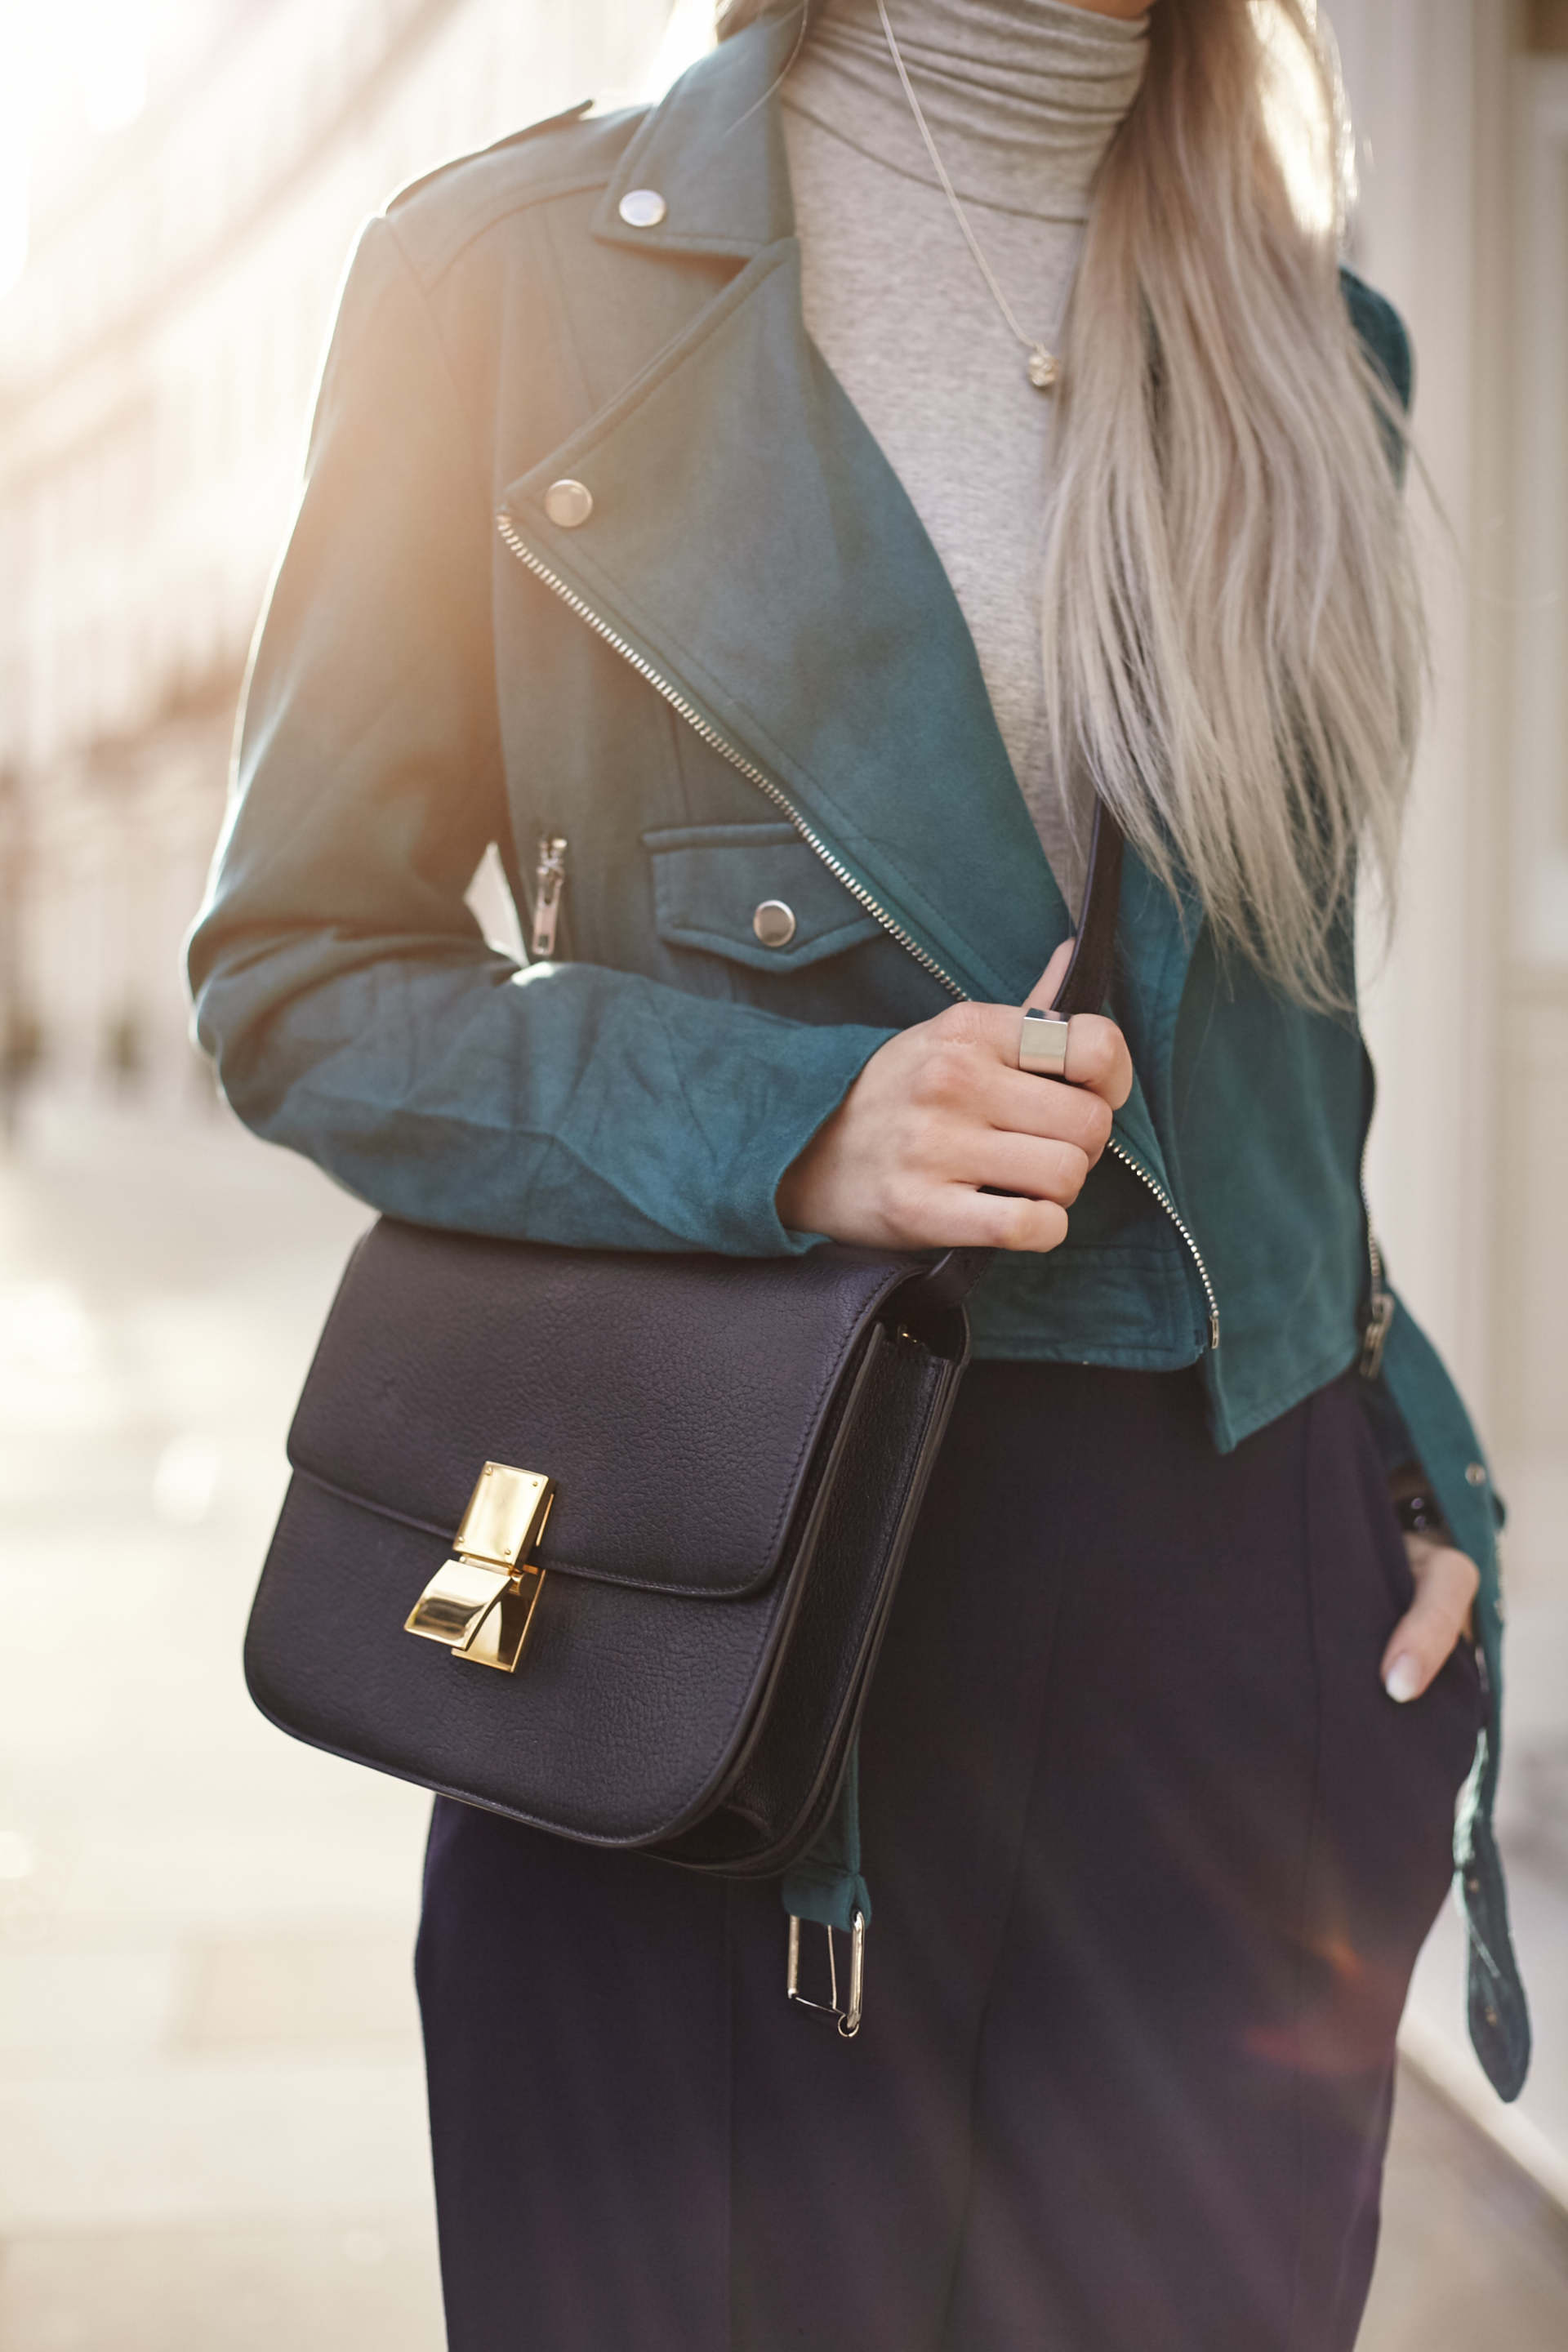 inthefrow celine box bag, missguided teal suede jacket